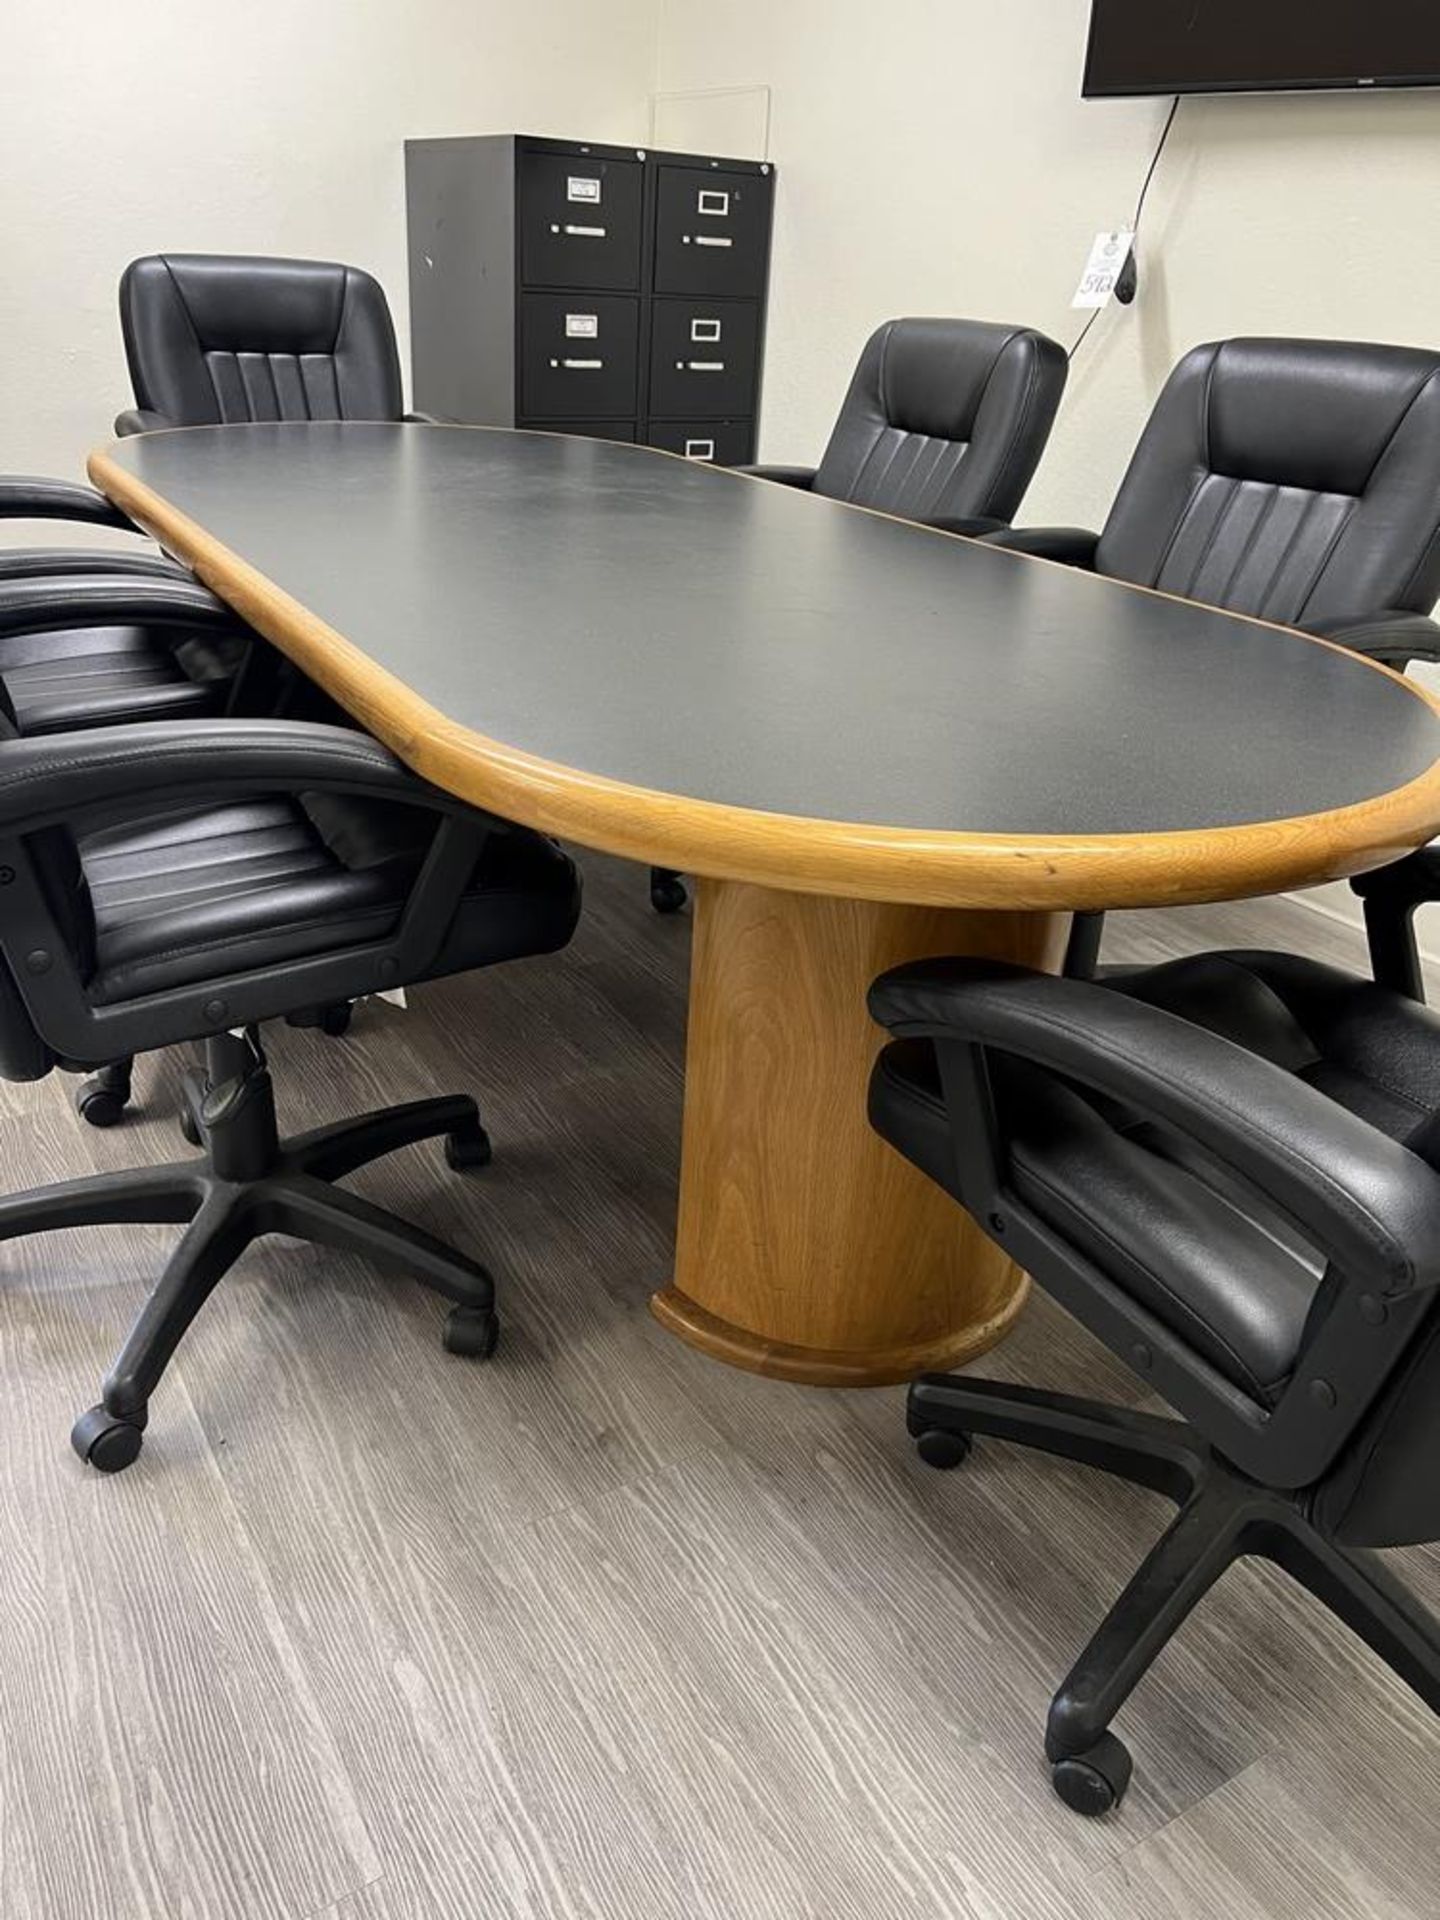 Conference Table With (6) Chairs 98" x 41 1/2" x 30" - Image 5 of 6